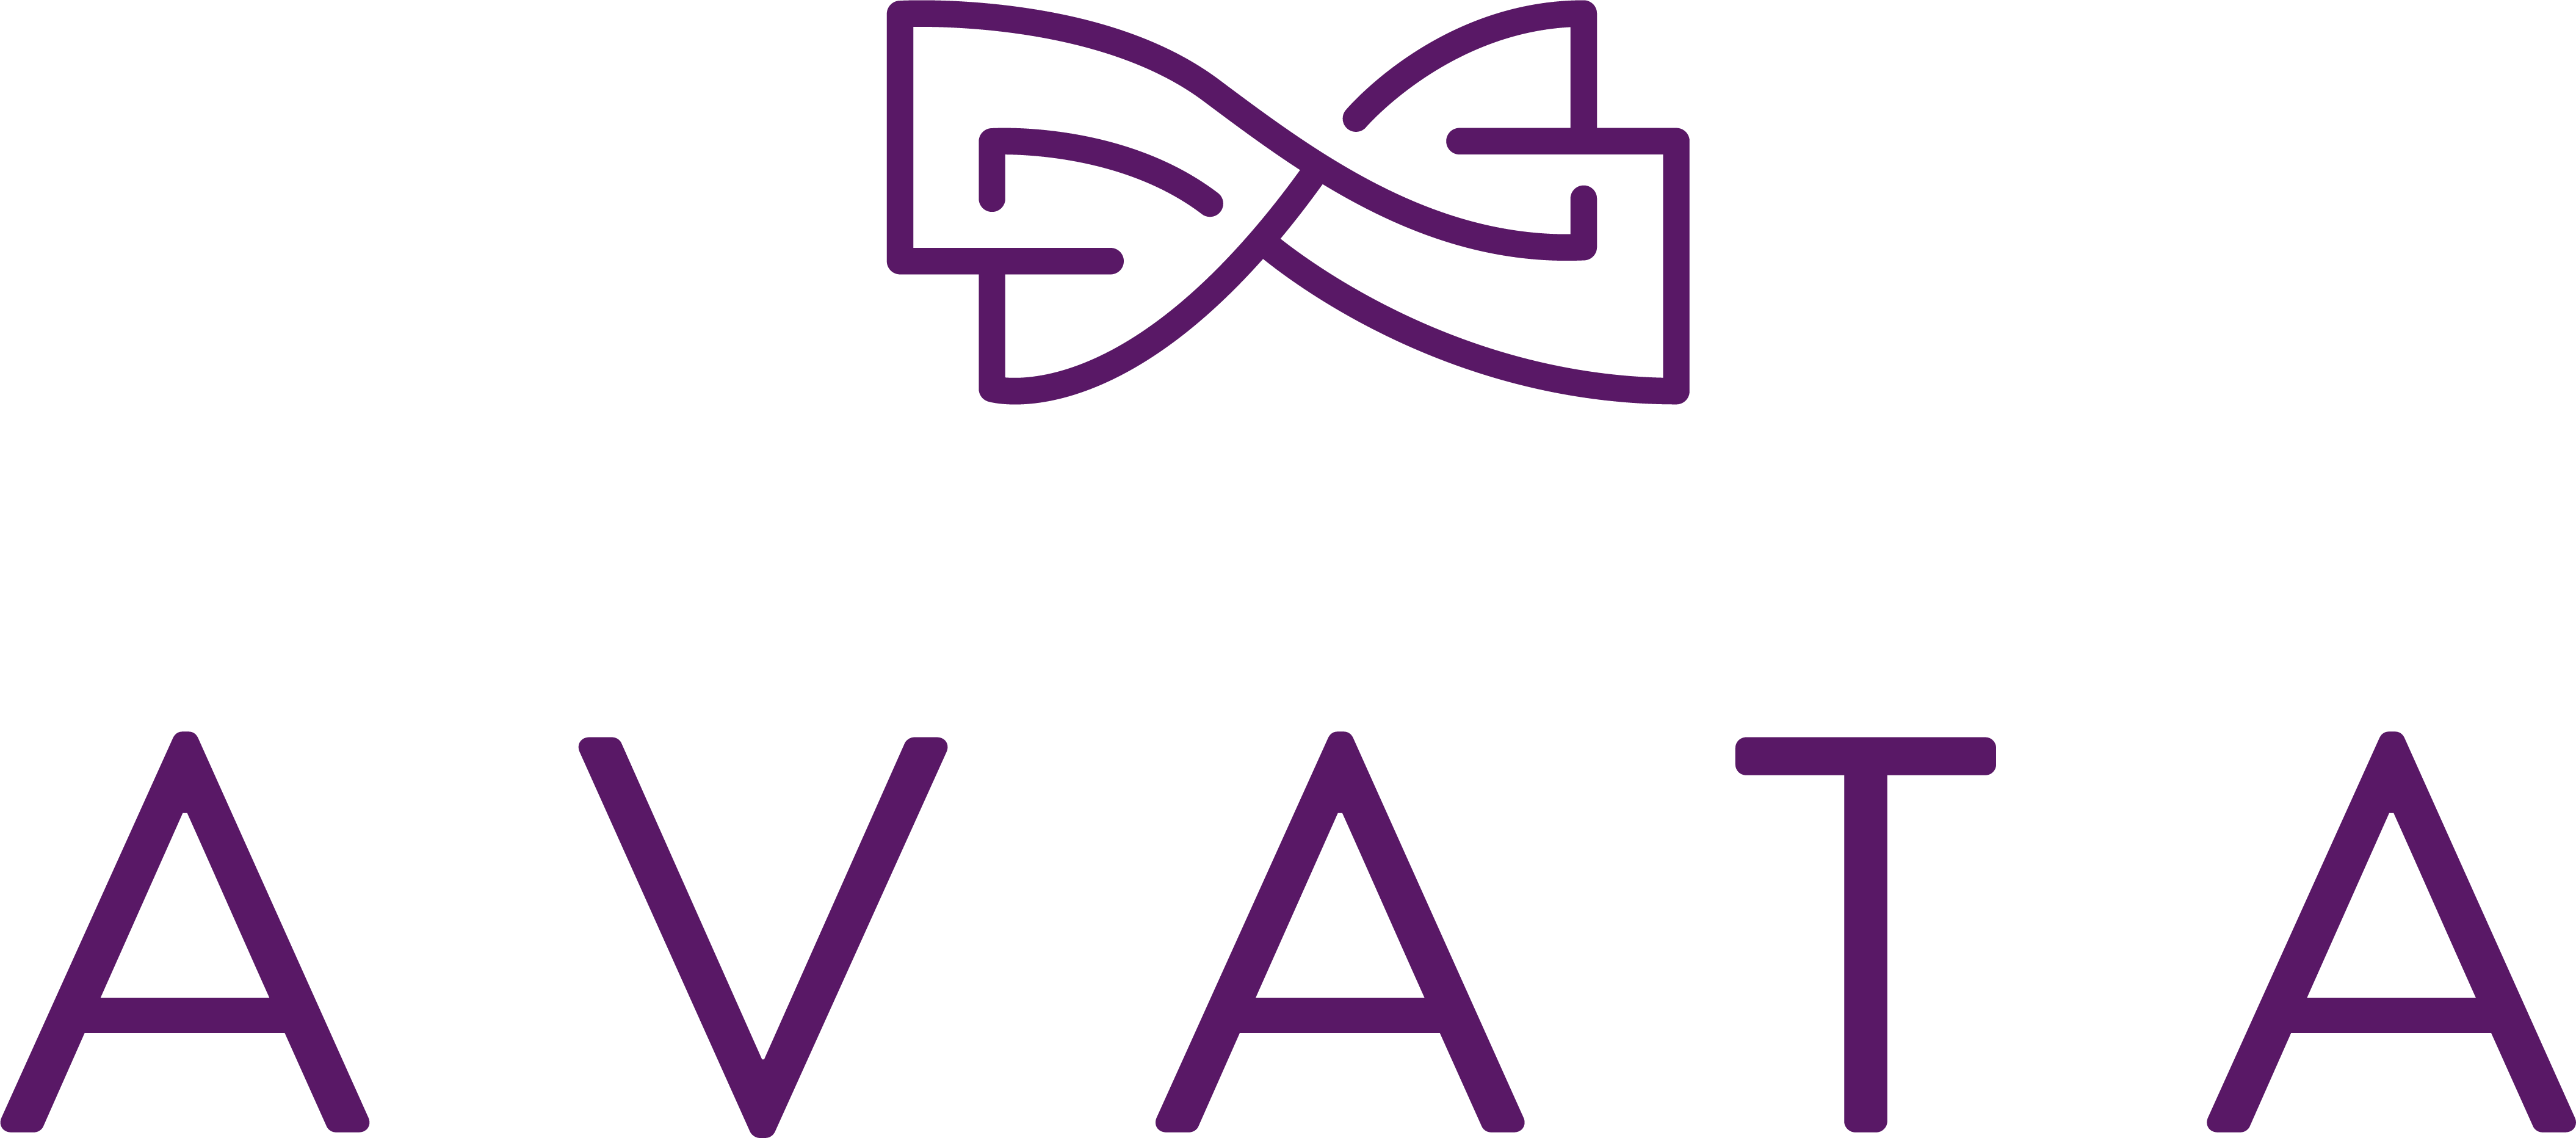 Avata Property Services Limited